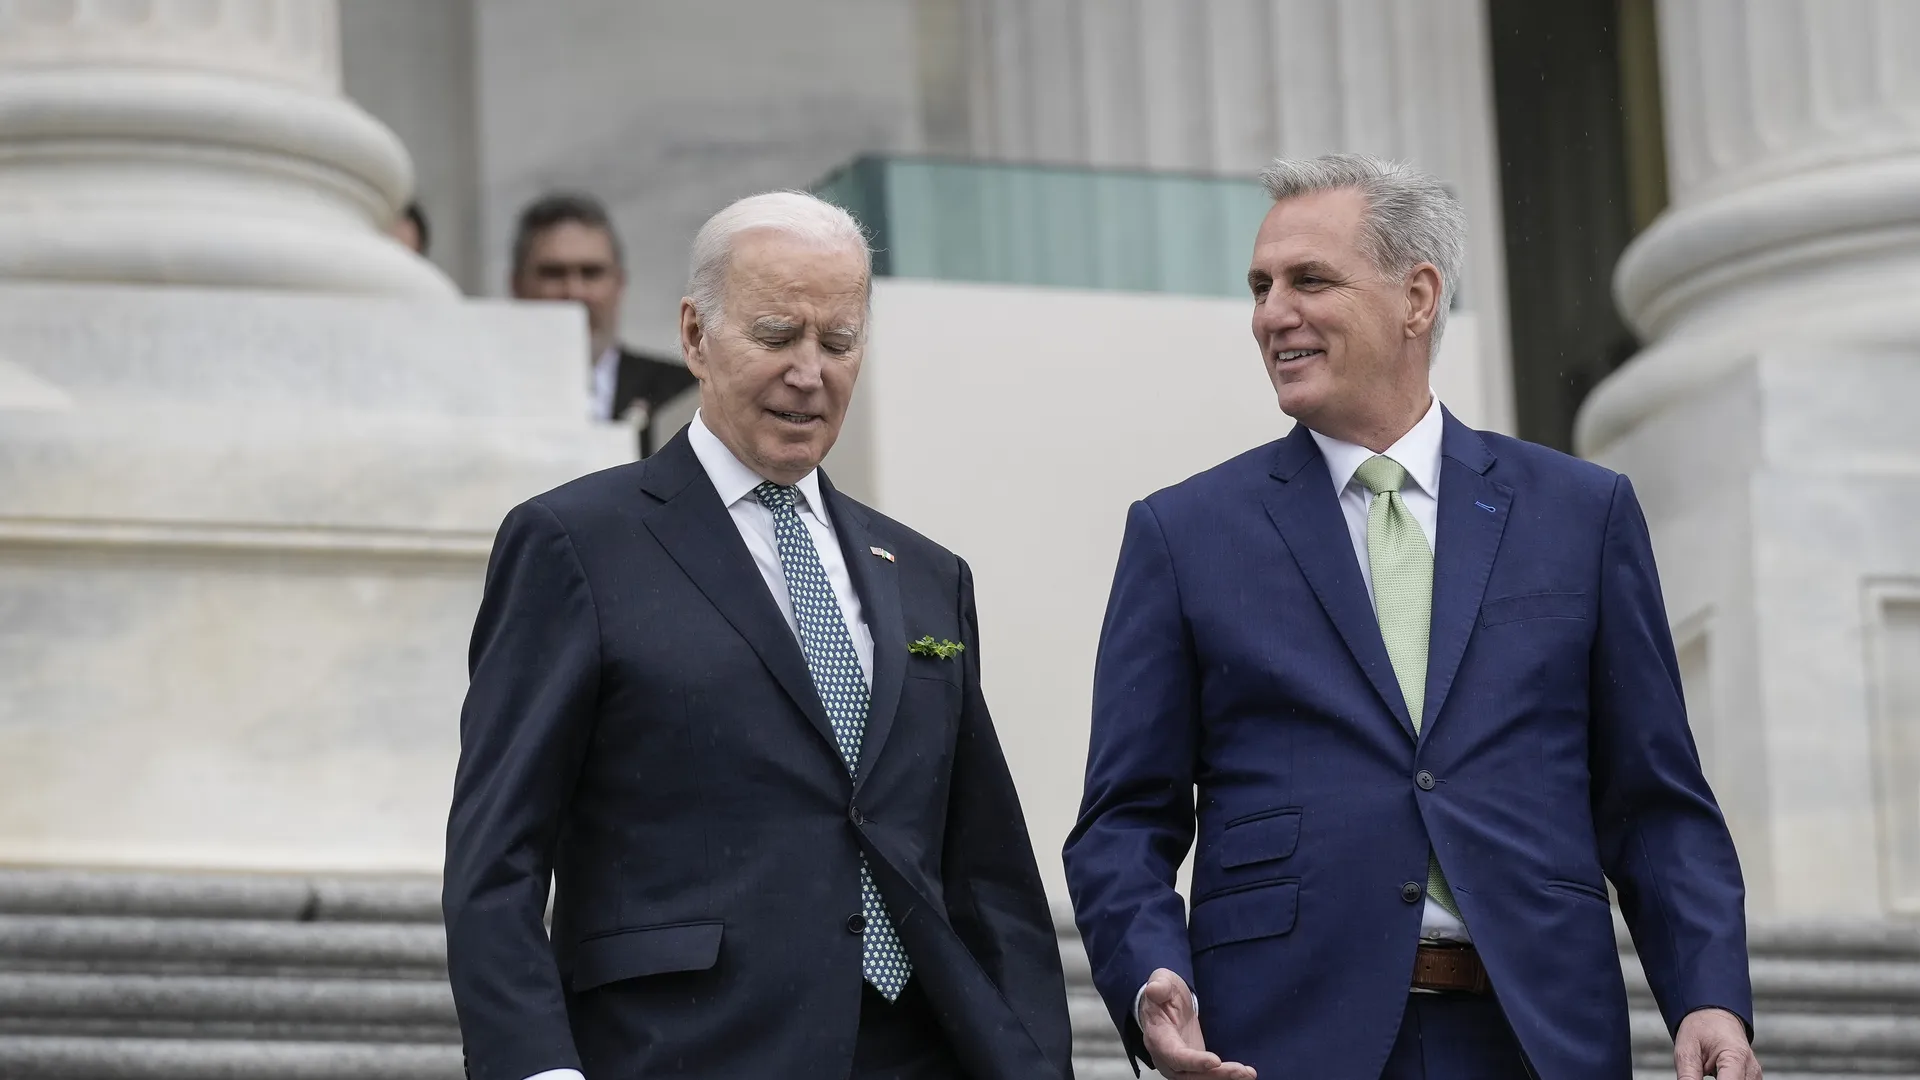 **Narrow Win for McCarthy-Biden: Debt Ceiling Bill Moves Ahead with 7-6 Committee Vote**